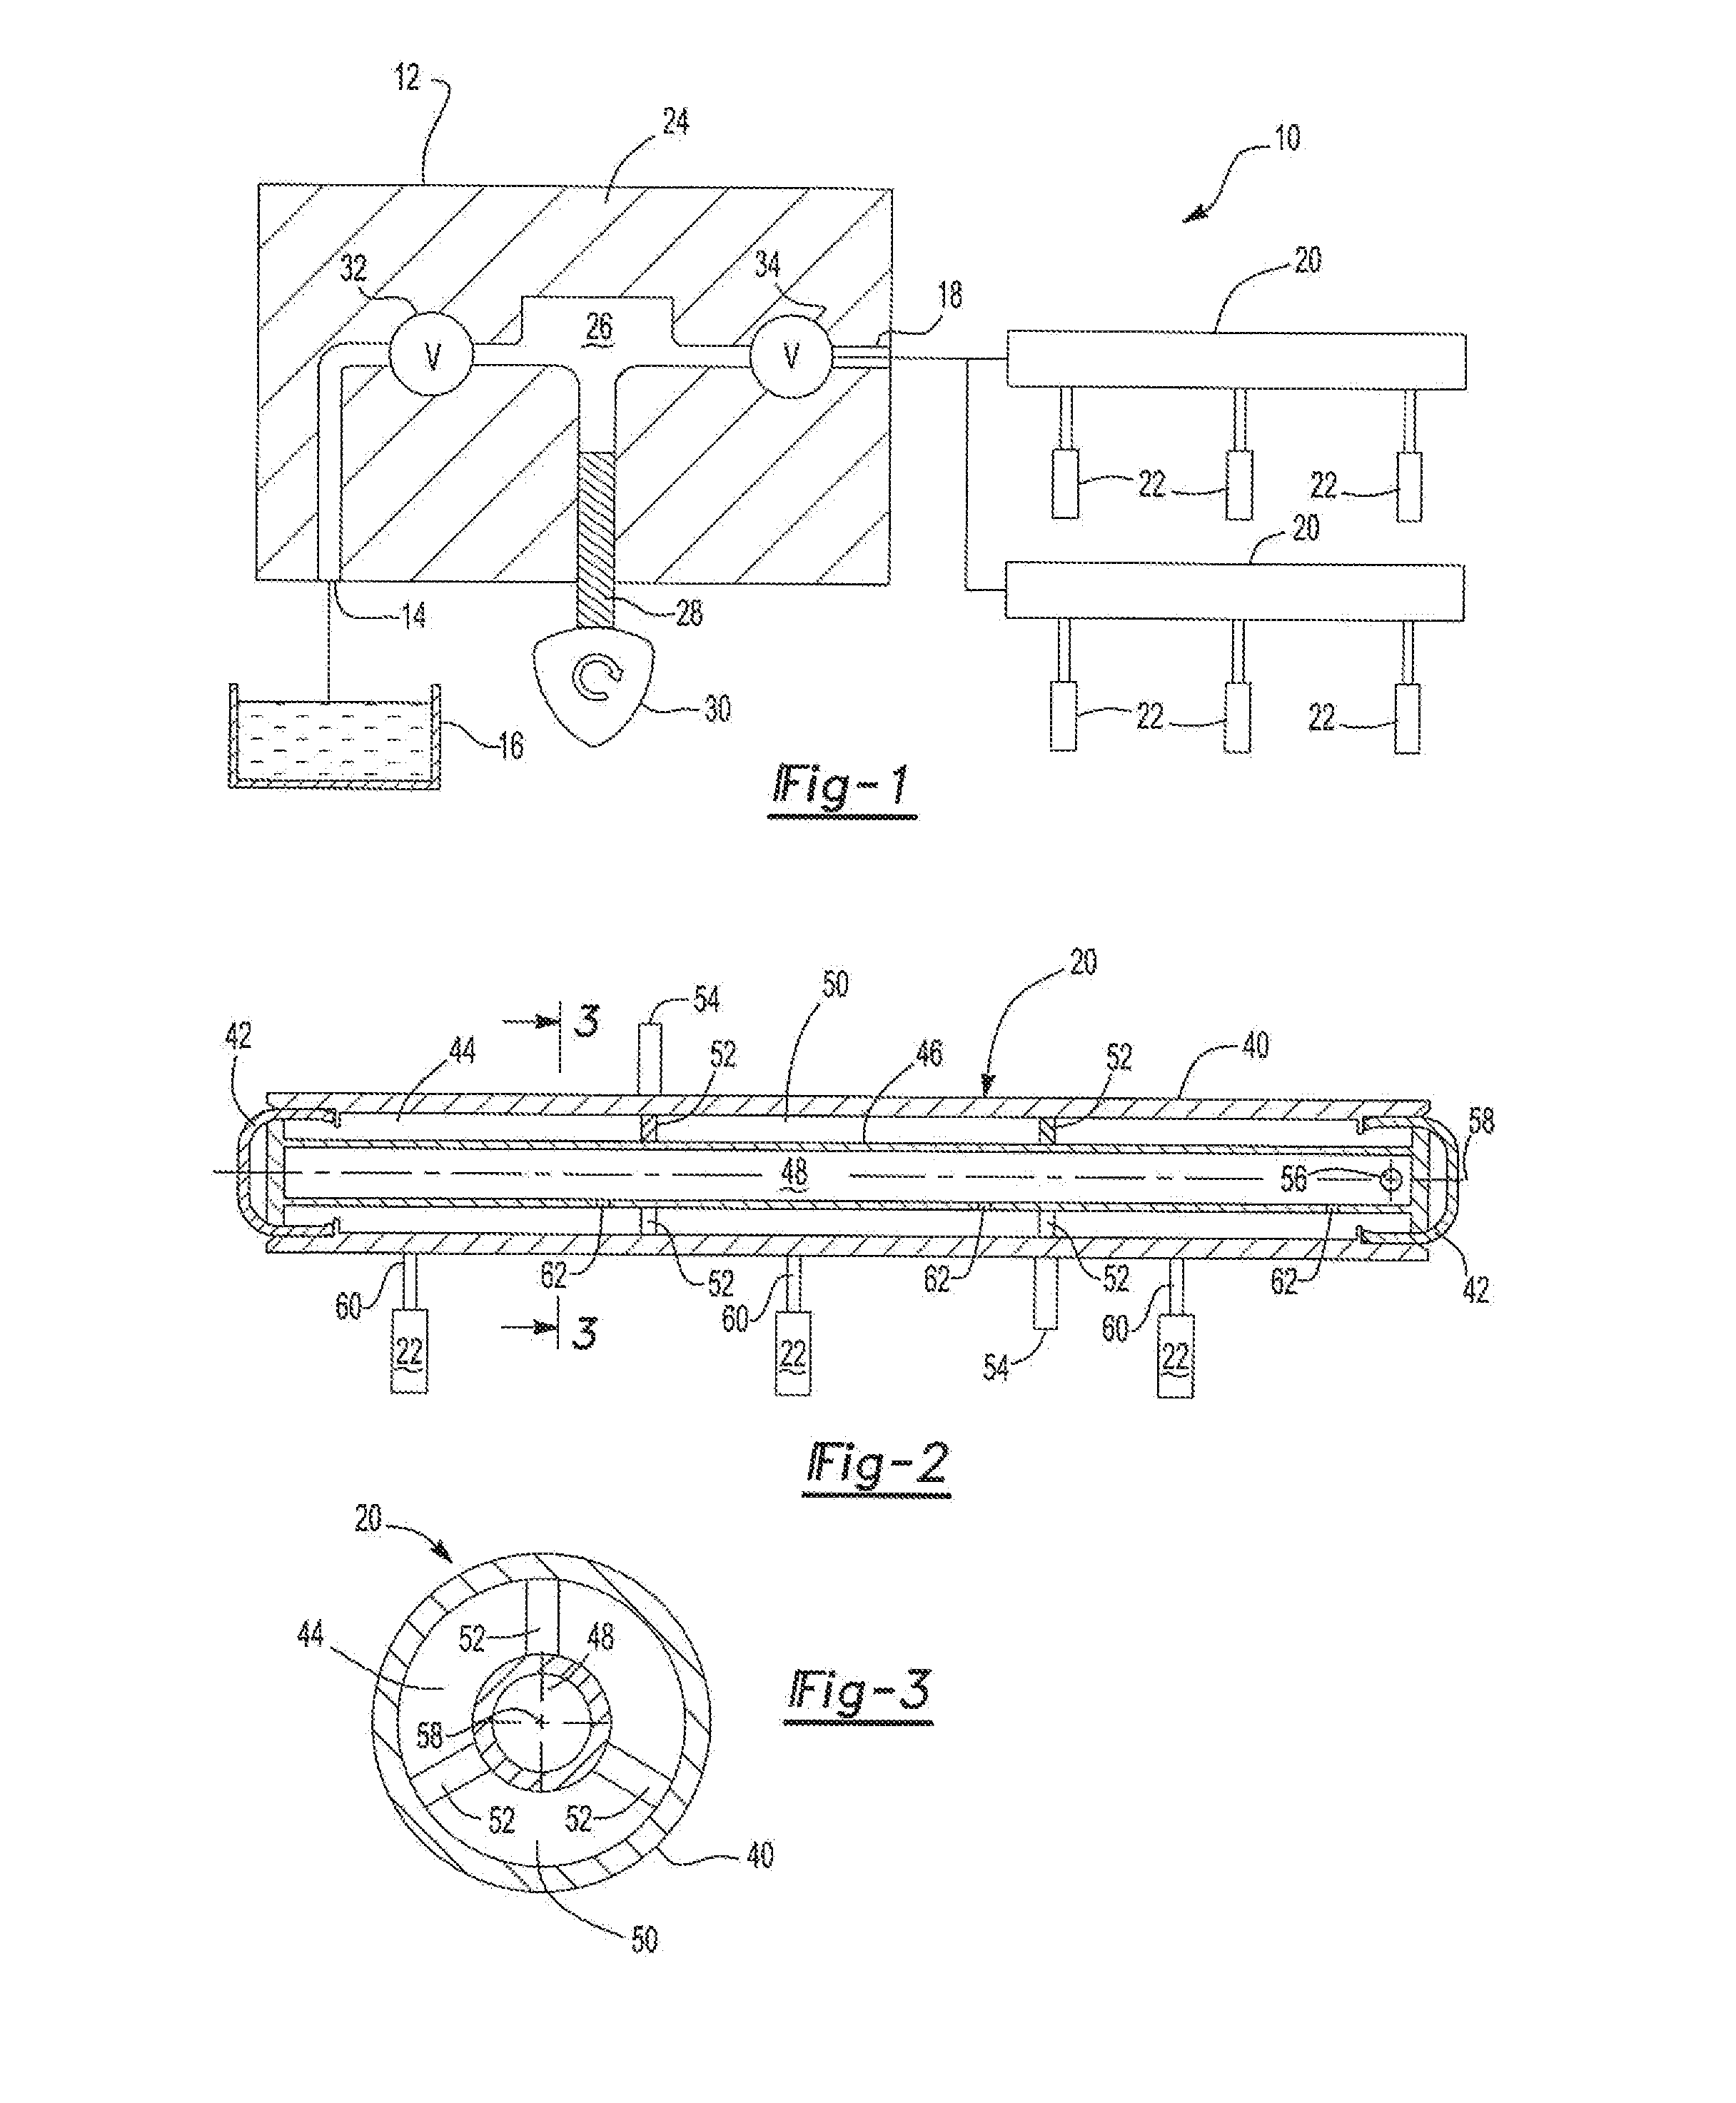 Fuel rail for an internal combustion engine